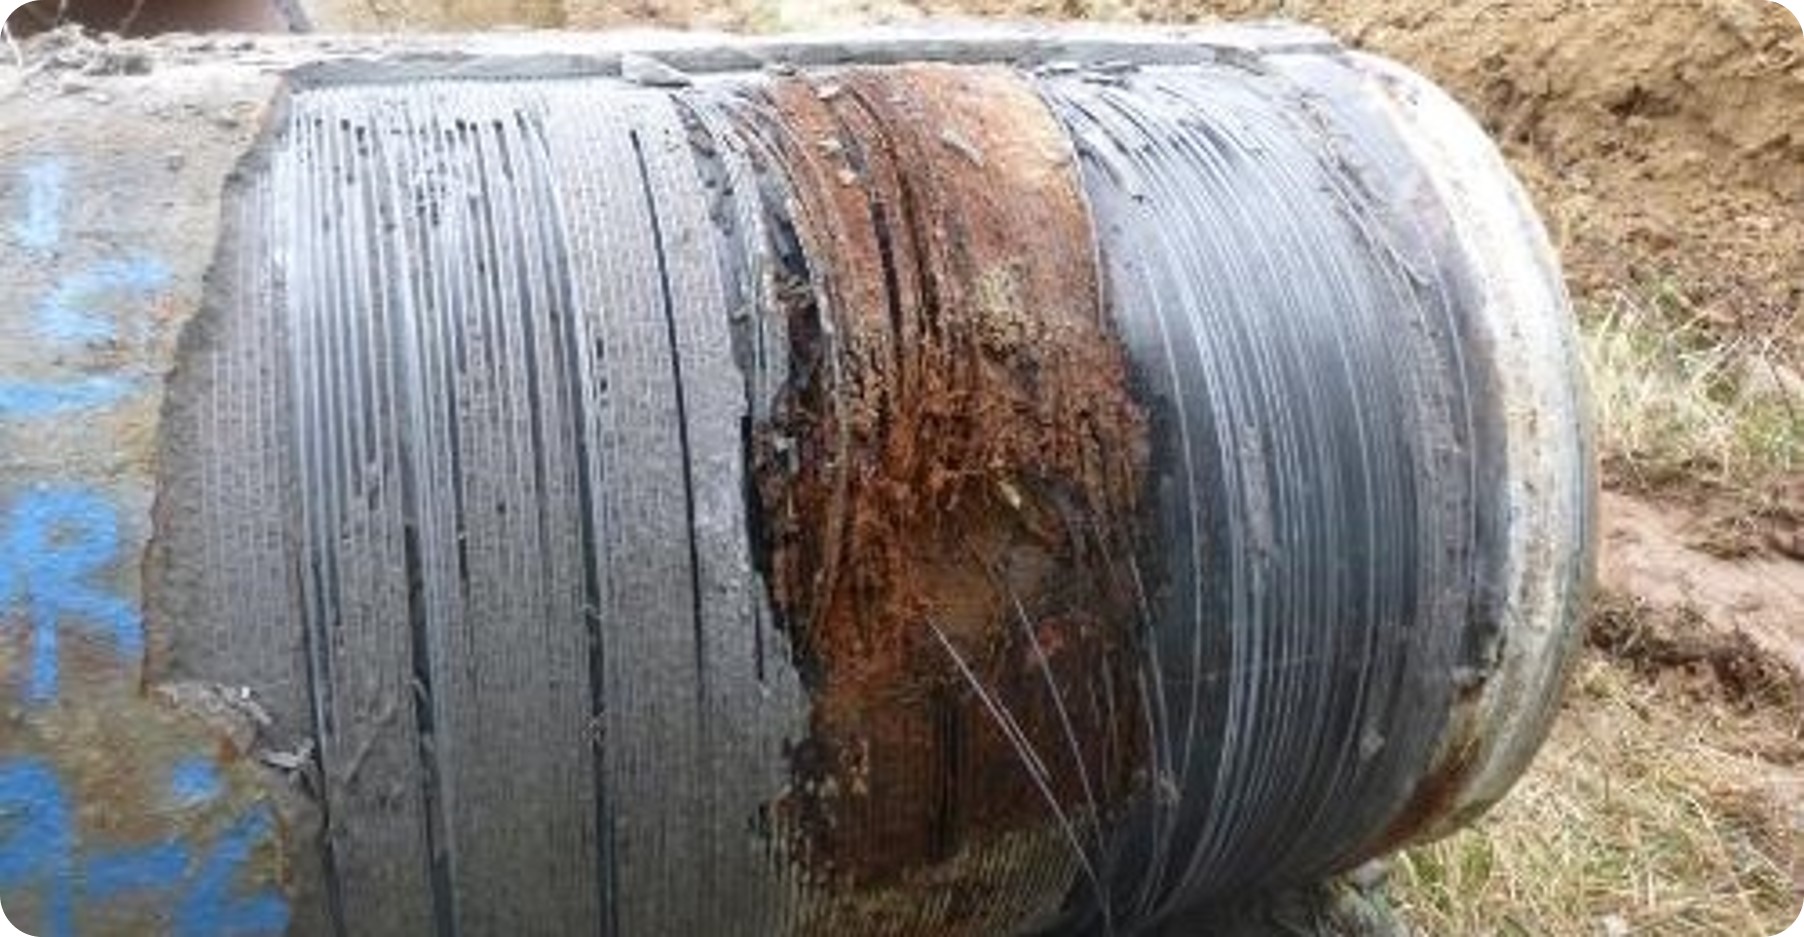 This photo is an example of a prestressed concrete cylinder pipe with wire damage. Photo credit: Denver Water.